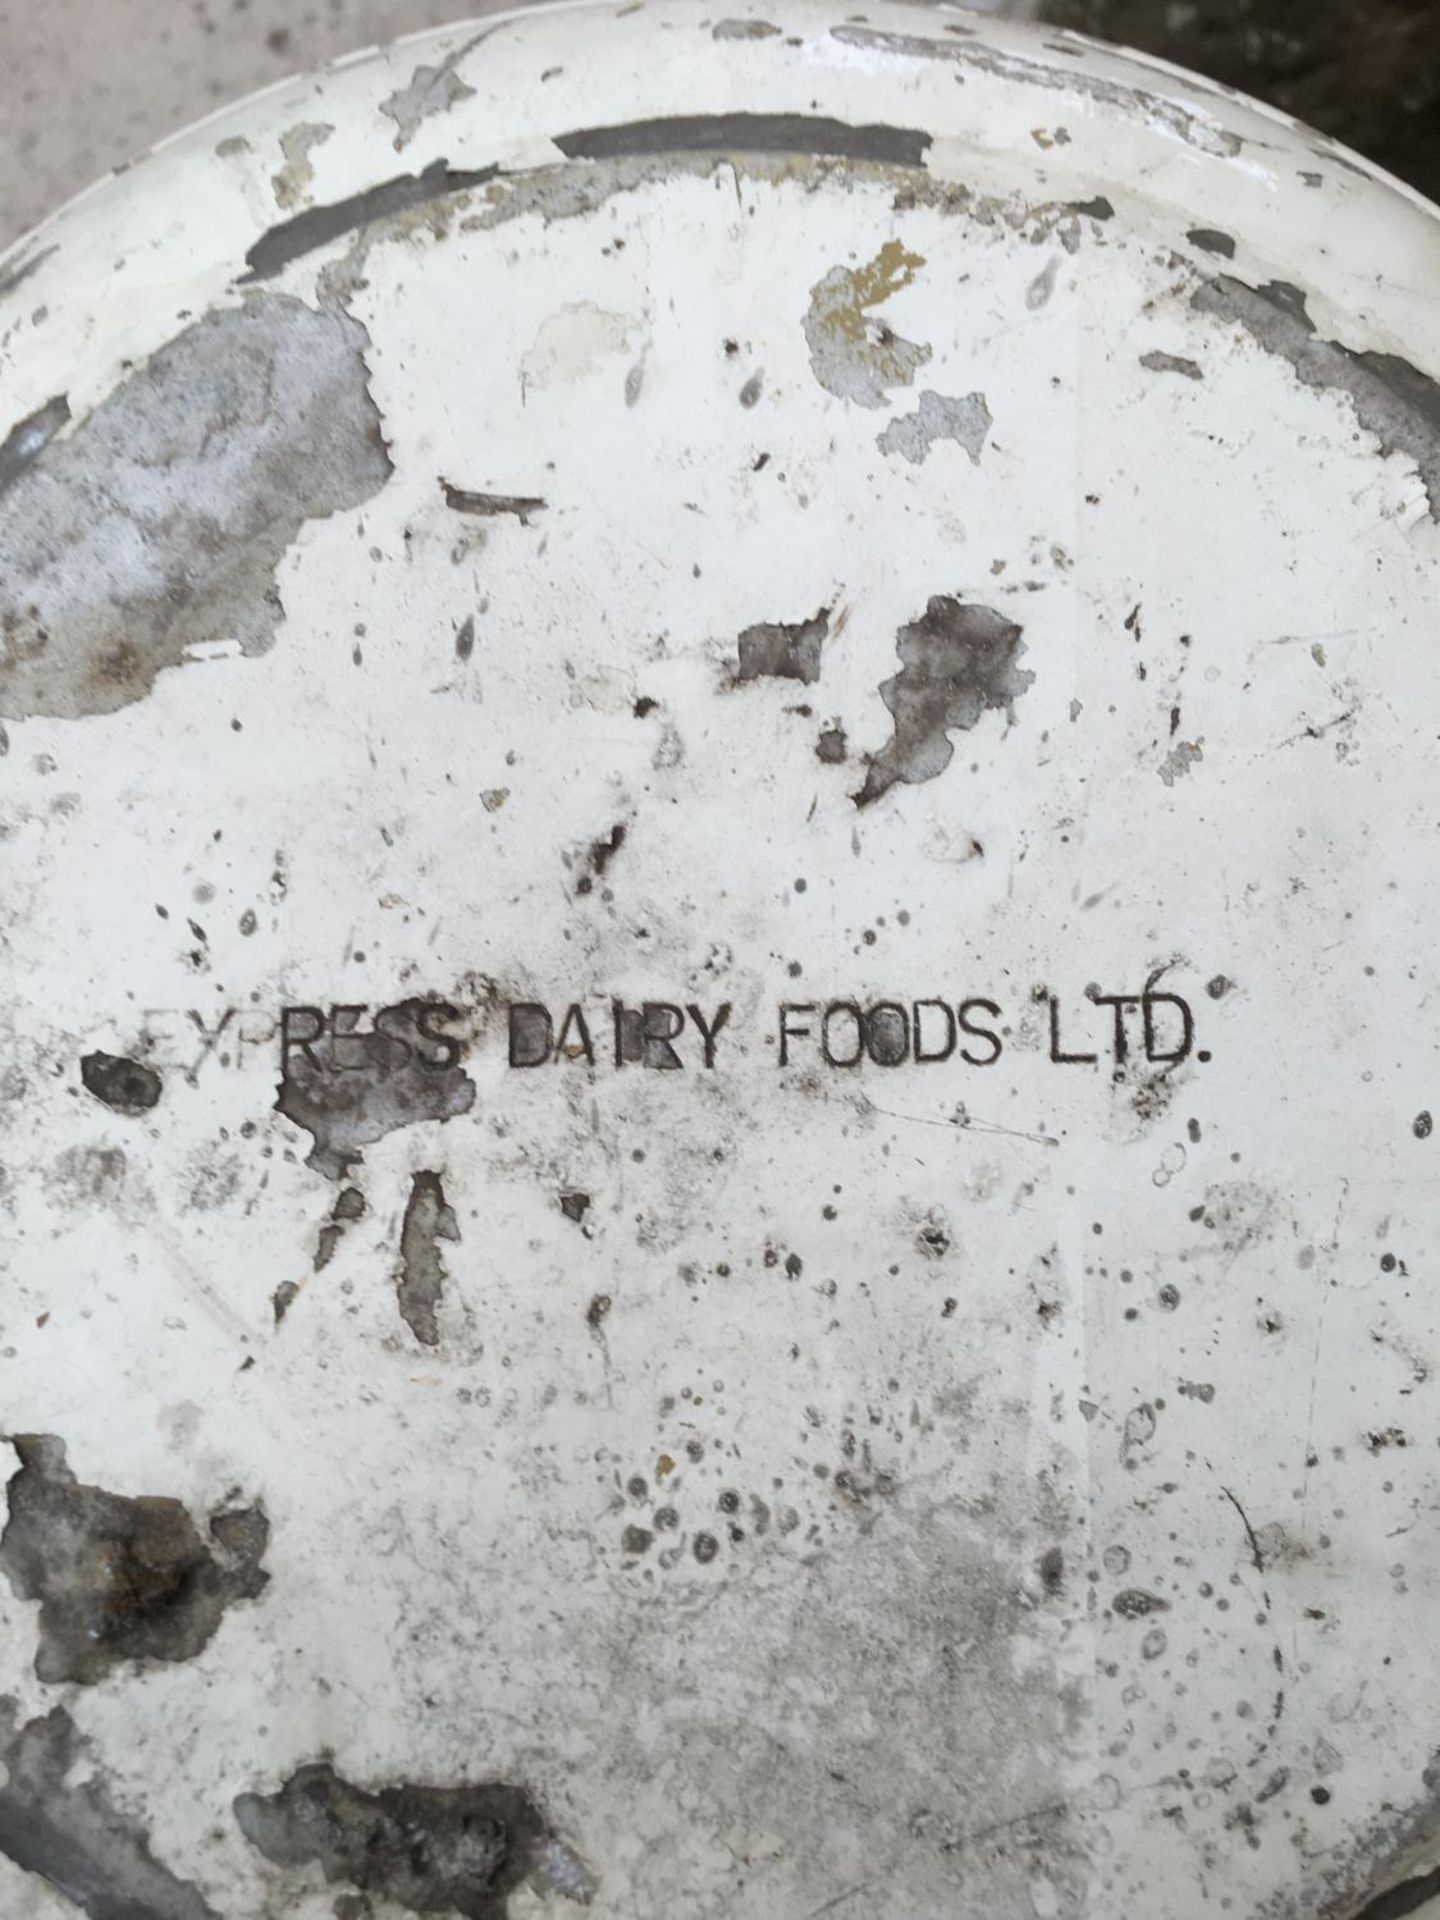 AN EXPRESS DAIRY FOODS LTD MIDLAND COUNTIES MILK CHURN WITH LID - Image 3 of 6